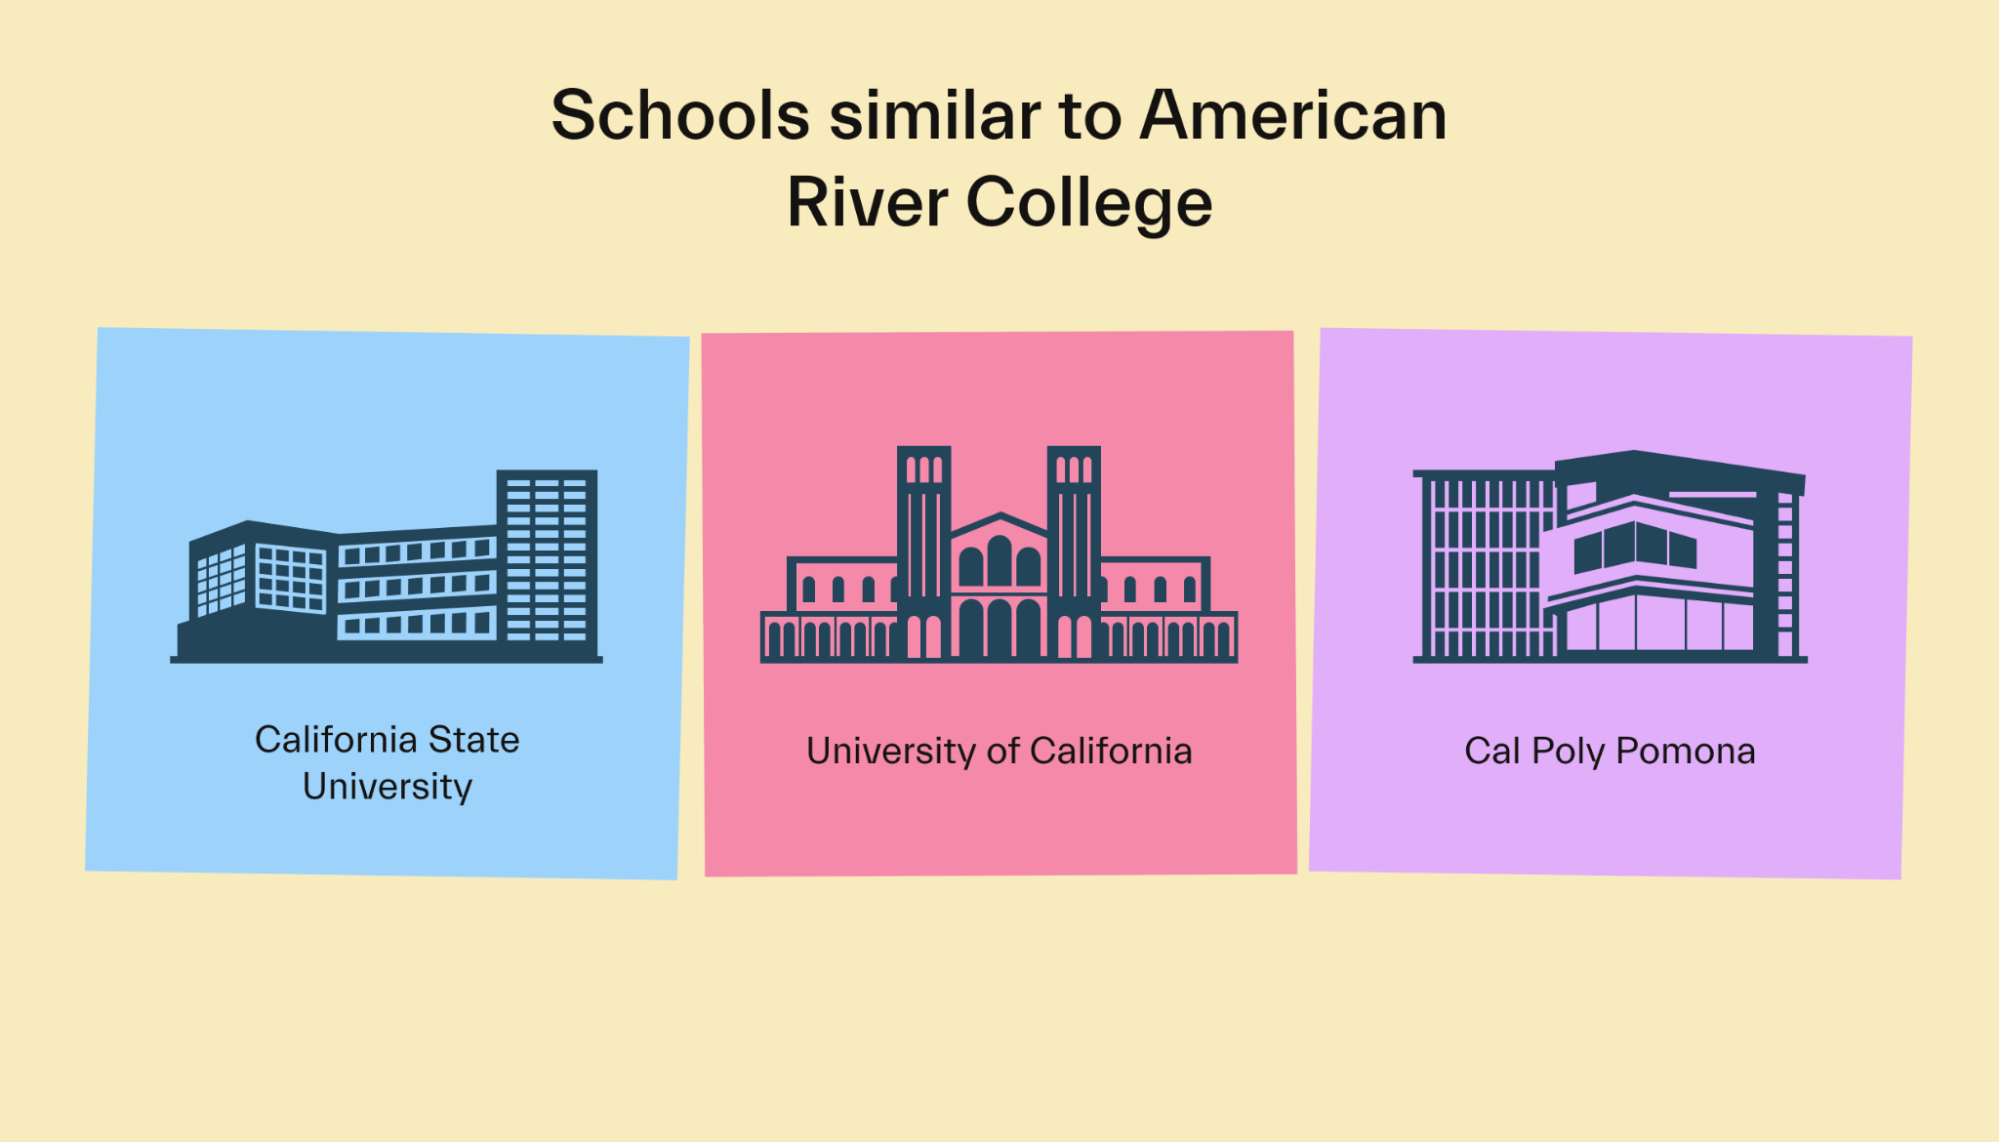 Schools similar to American River College